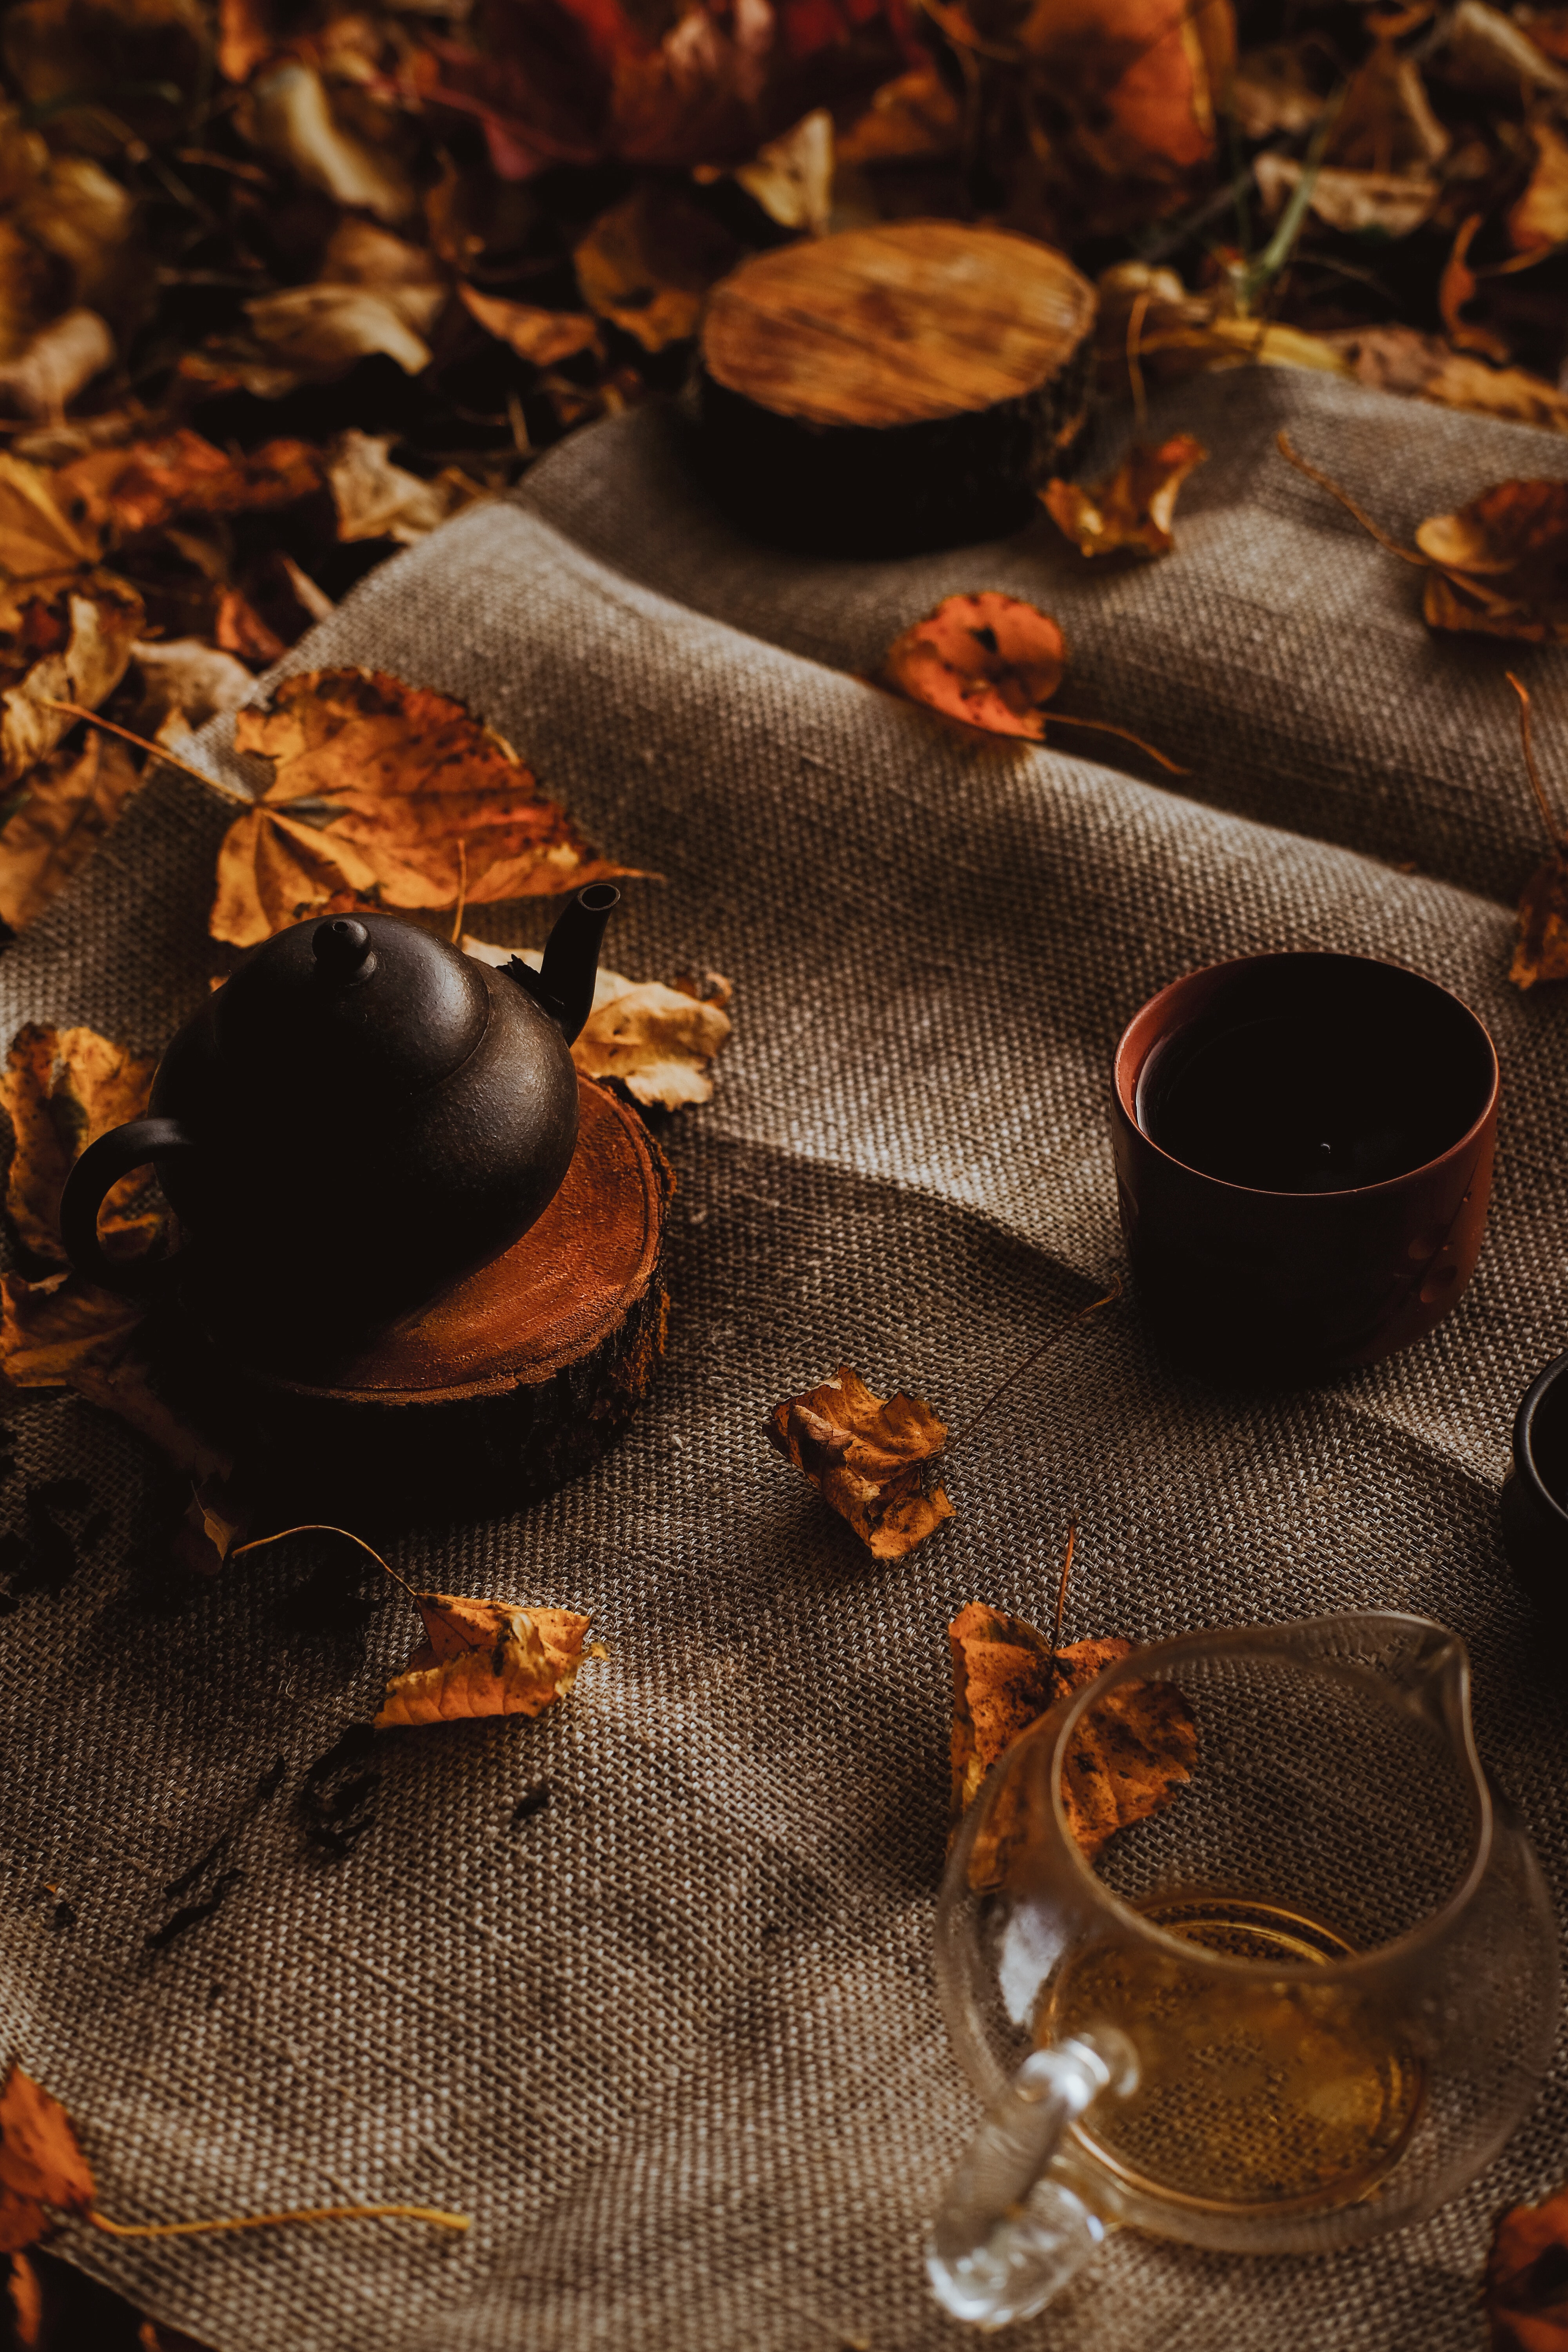 77910 Screensavers and Wallpapers Teapot for phone. Download teapot, autumn, leaves, miscellanea, miscellaneous, cloth, kettle pictures for free